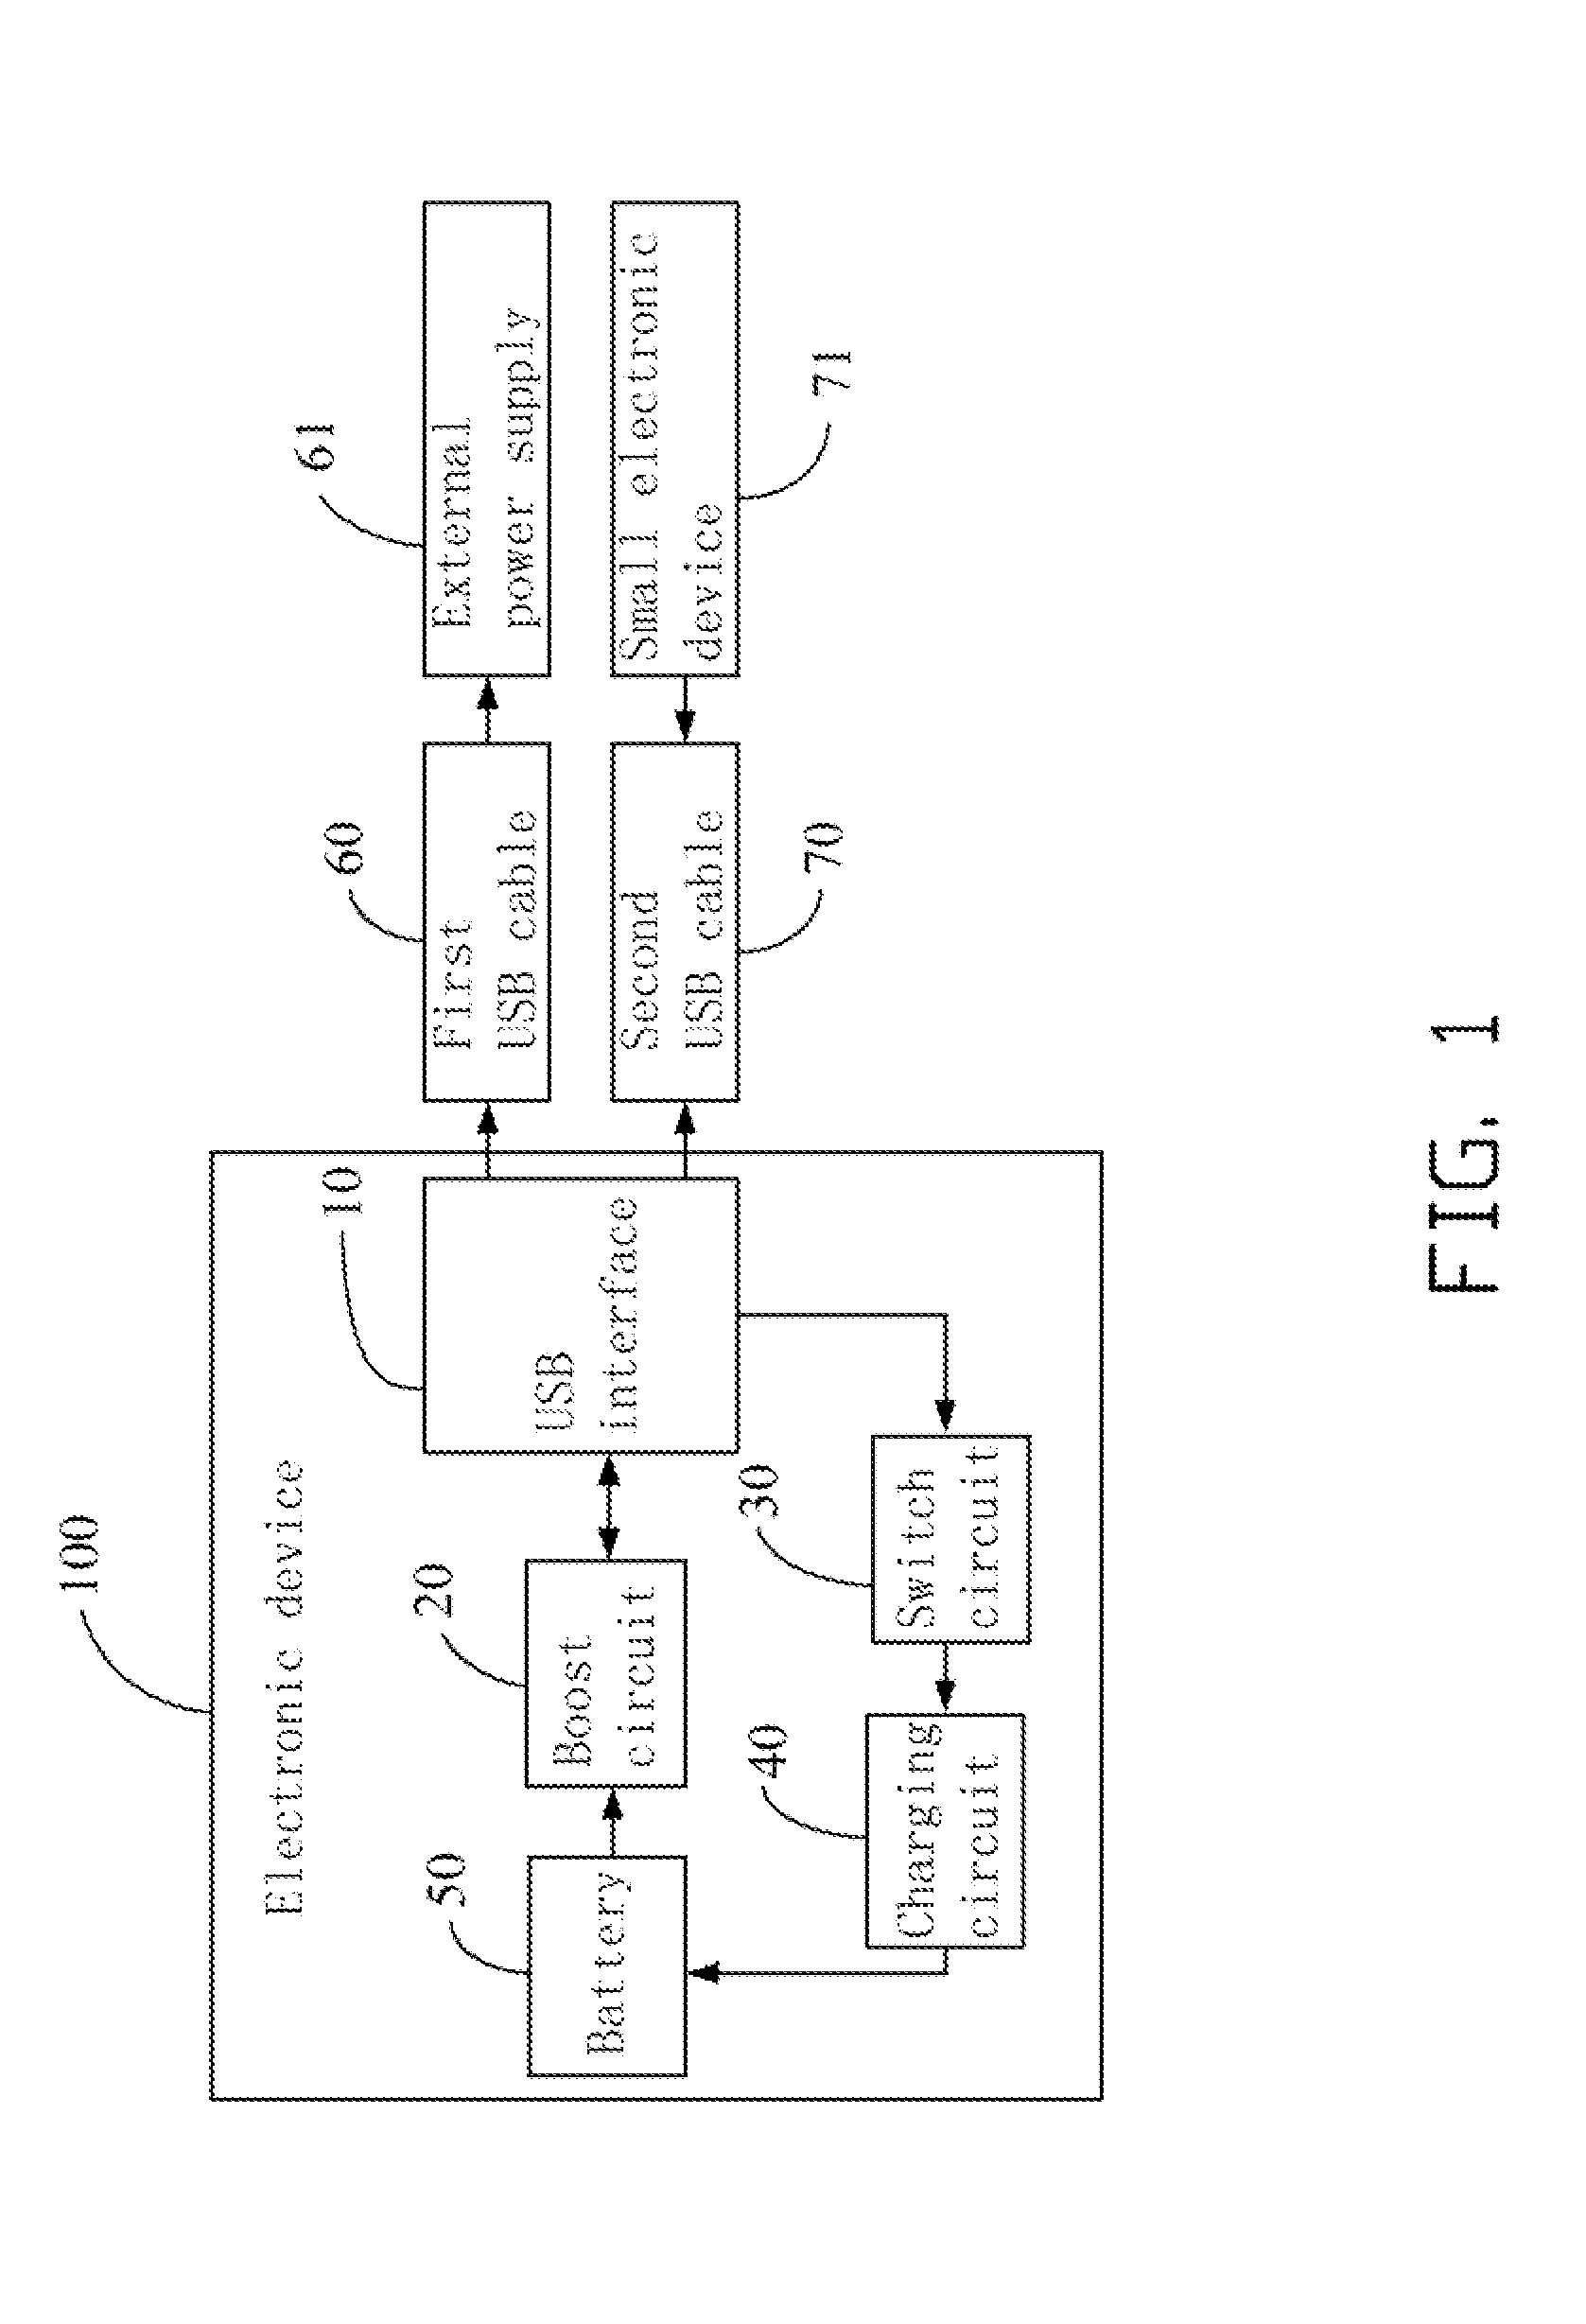 Electronic device with power output function